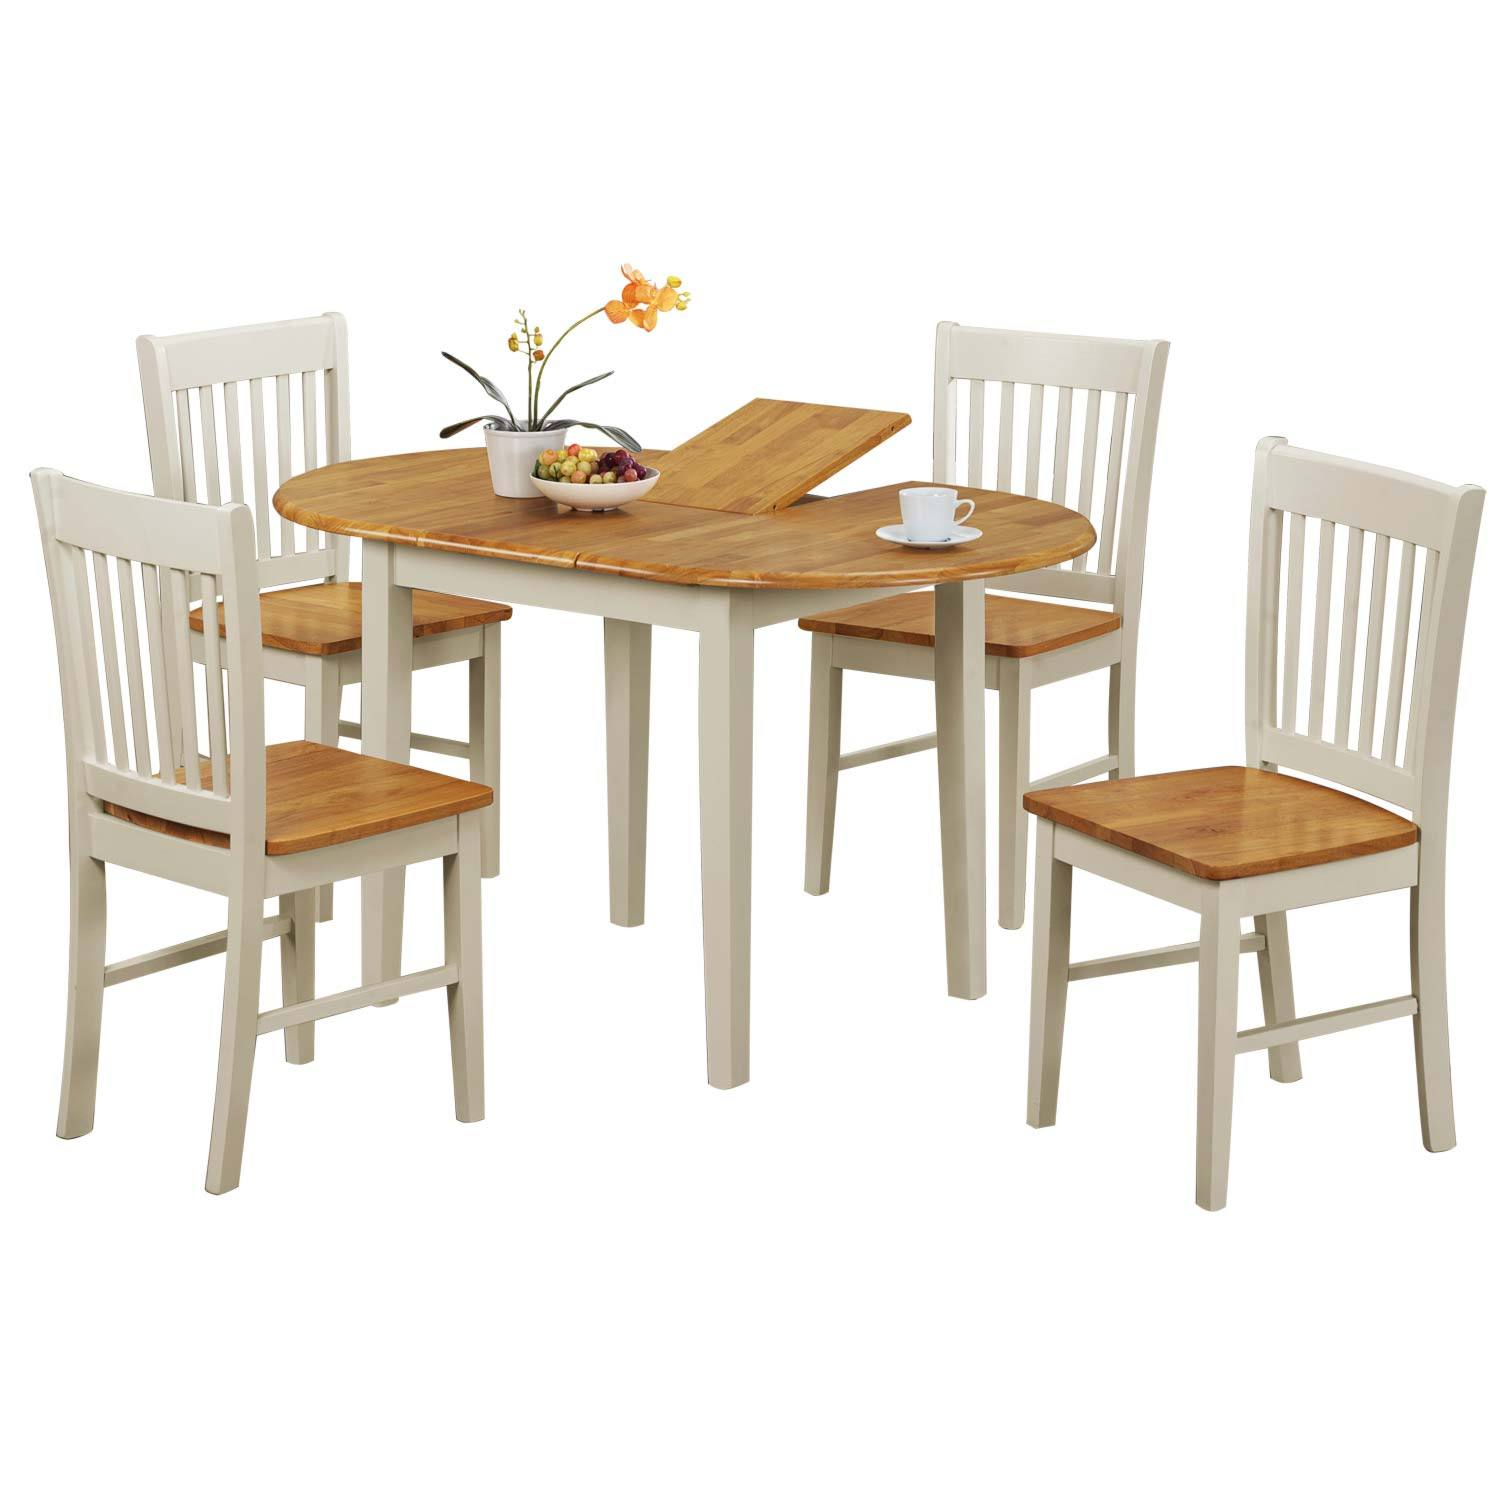 Kentucky Extending Dining Table And Four Chairs Set regarding dimensions 1500 X 1500